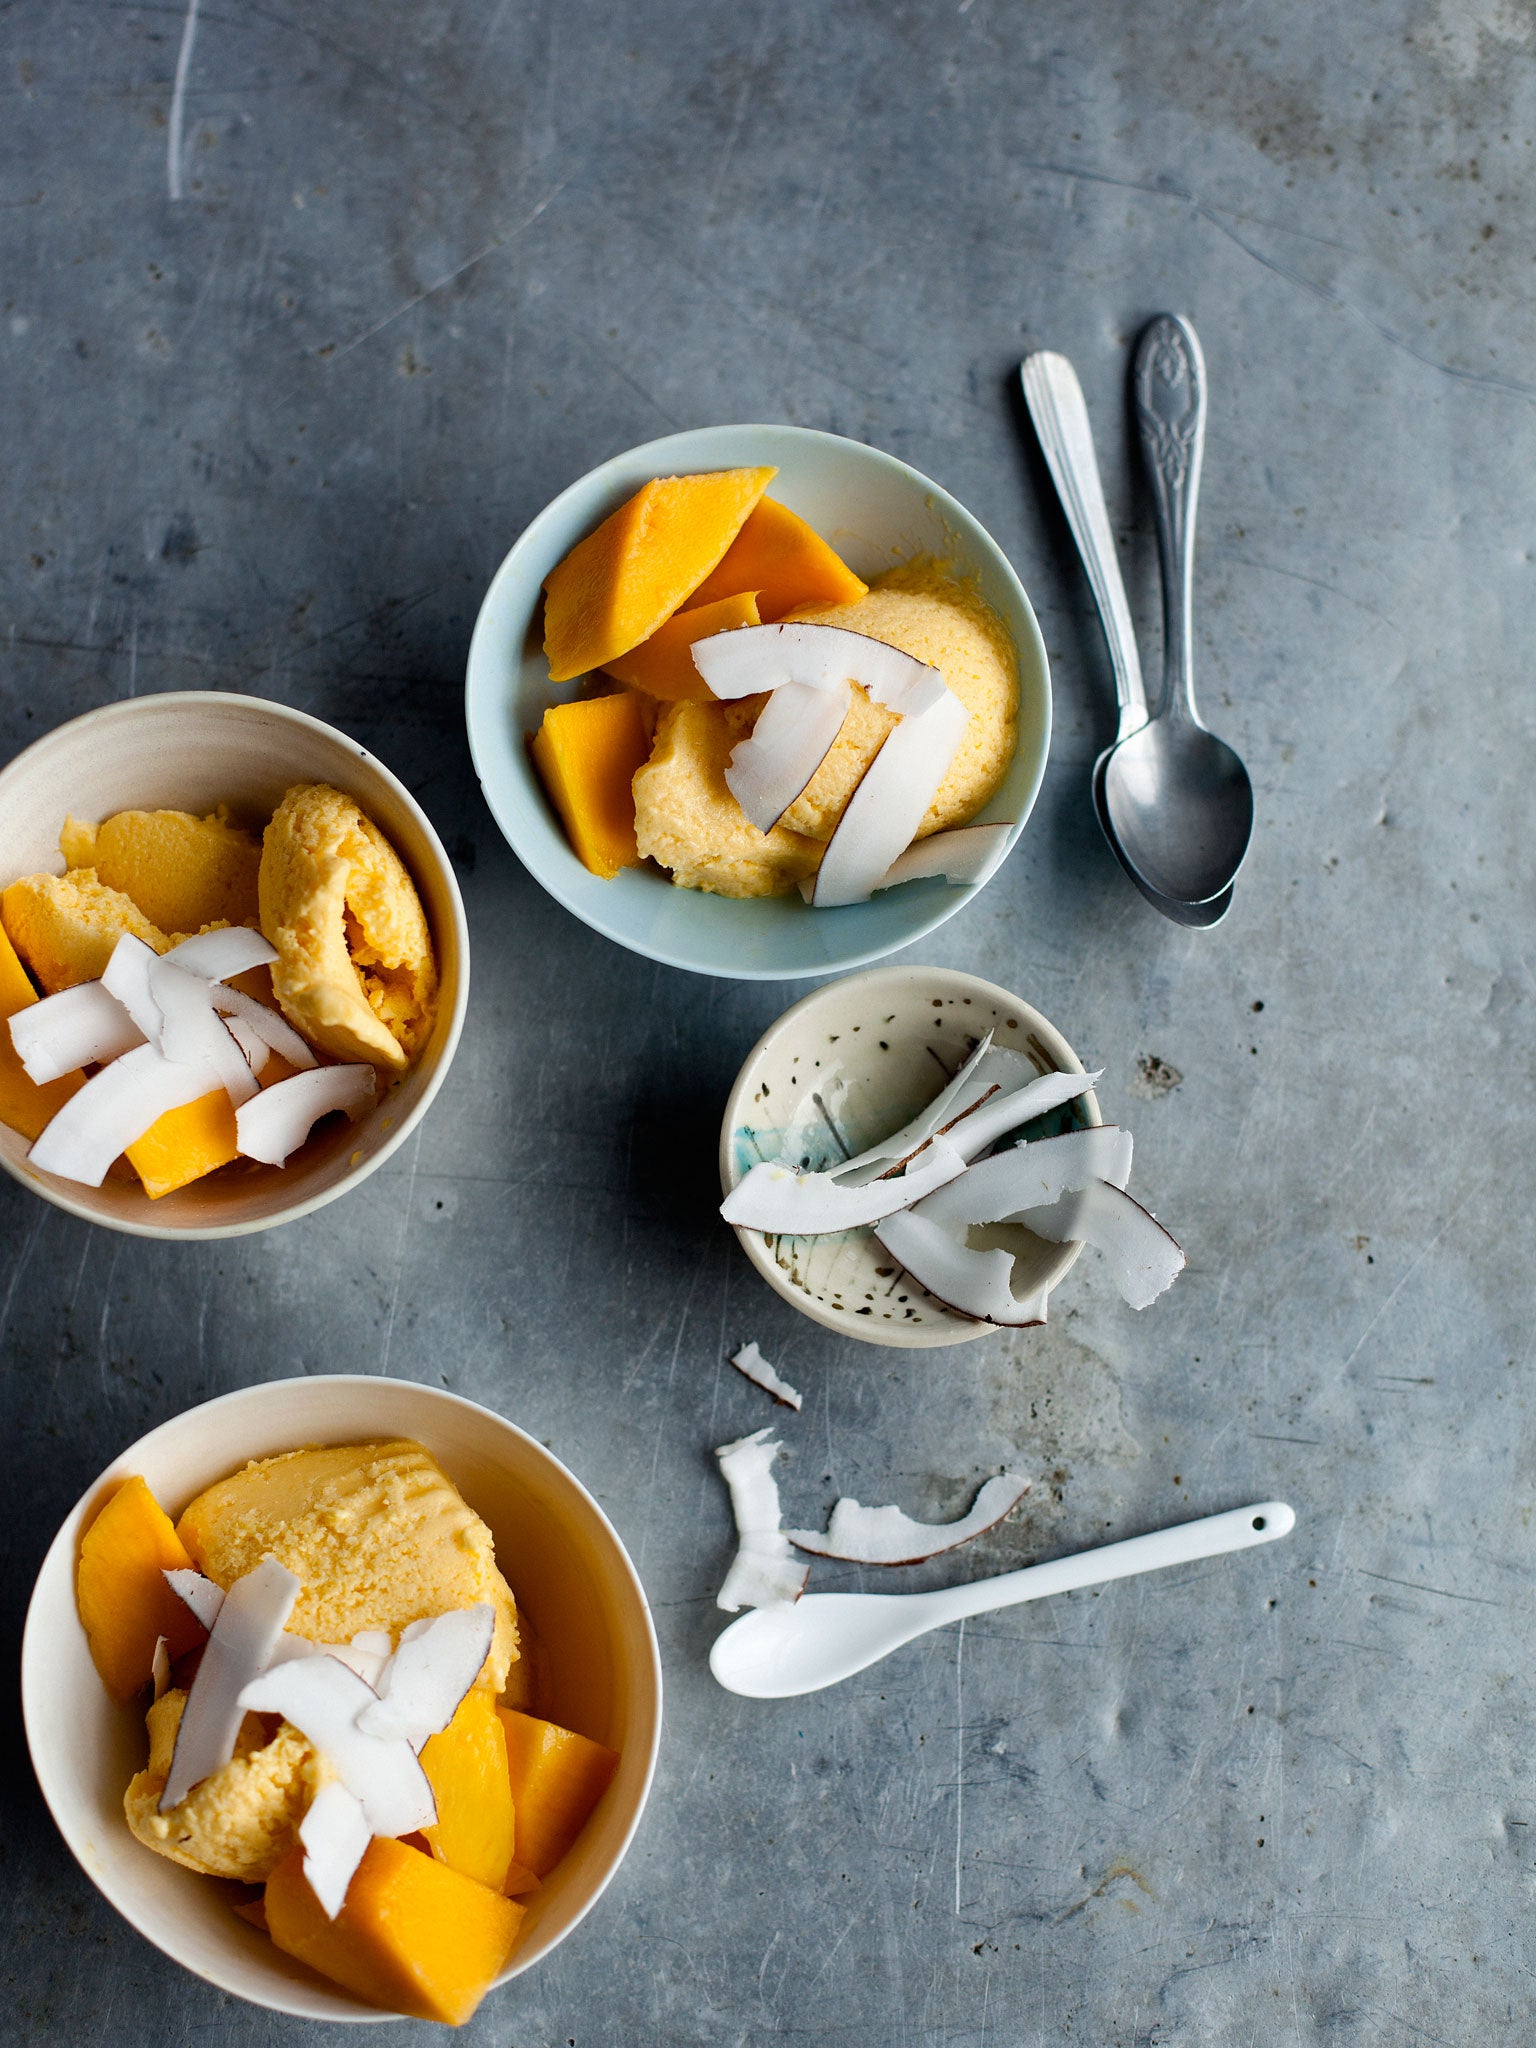 Mango and yoghurt ice is a cheat’s way of making ice cream Laura Edwards